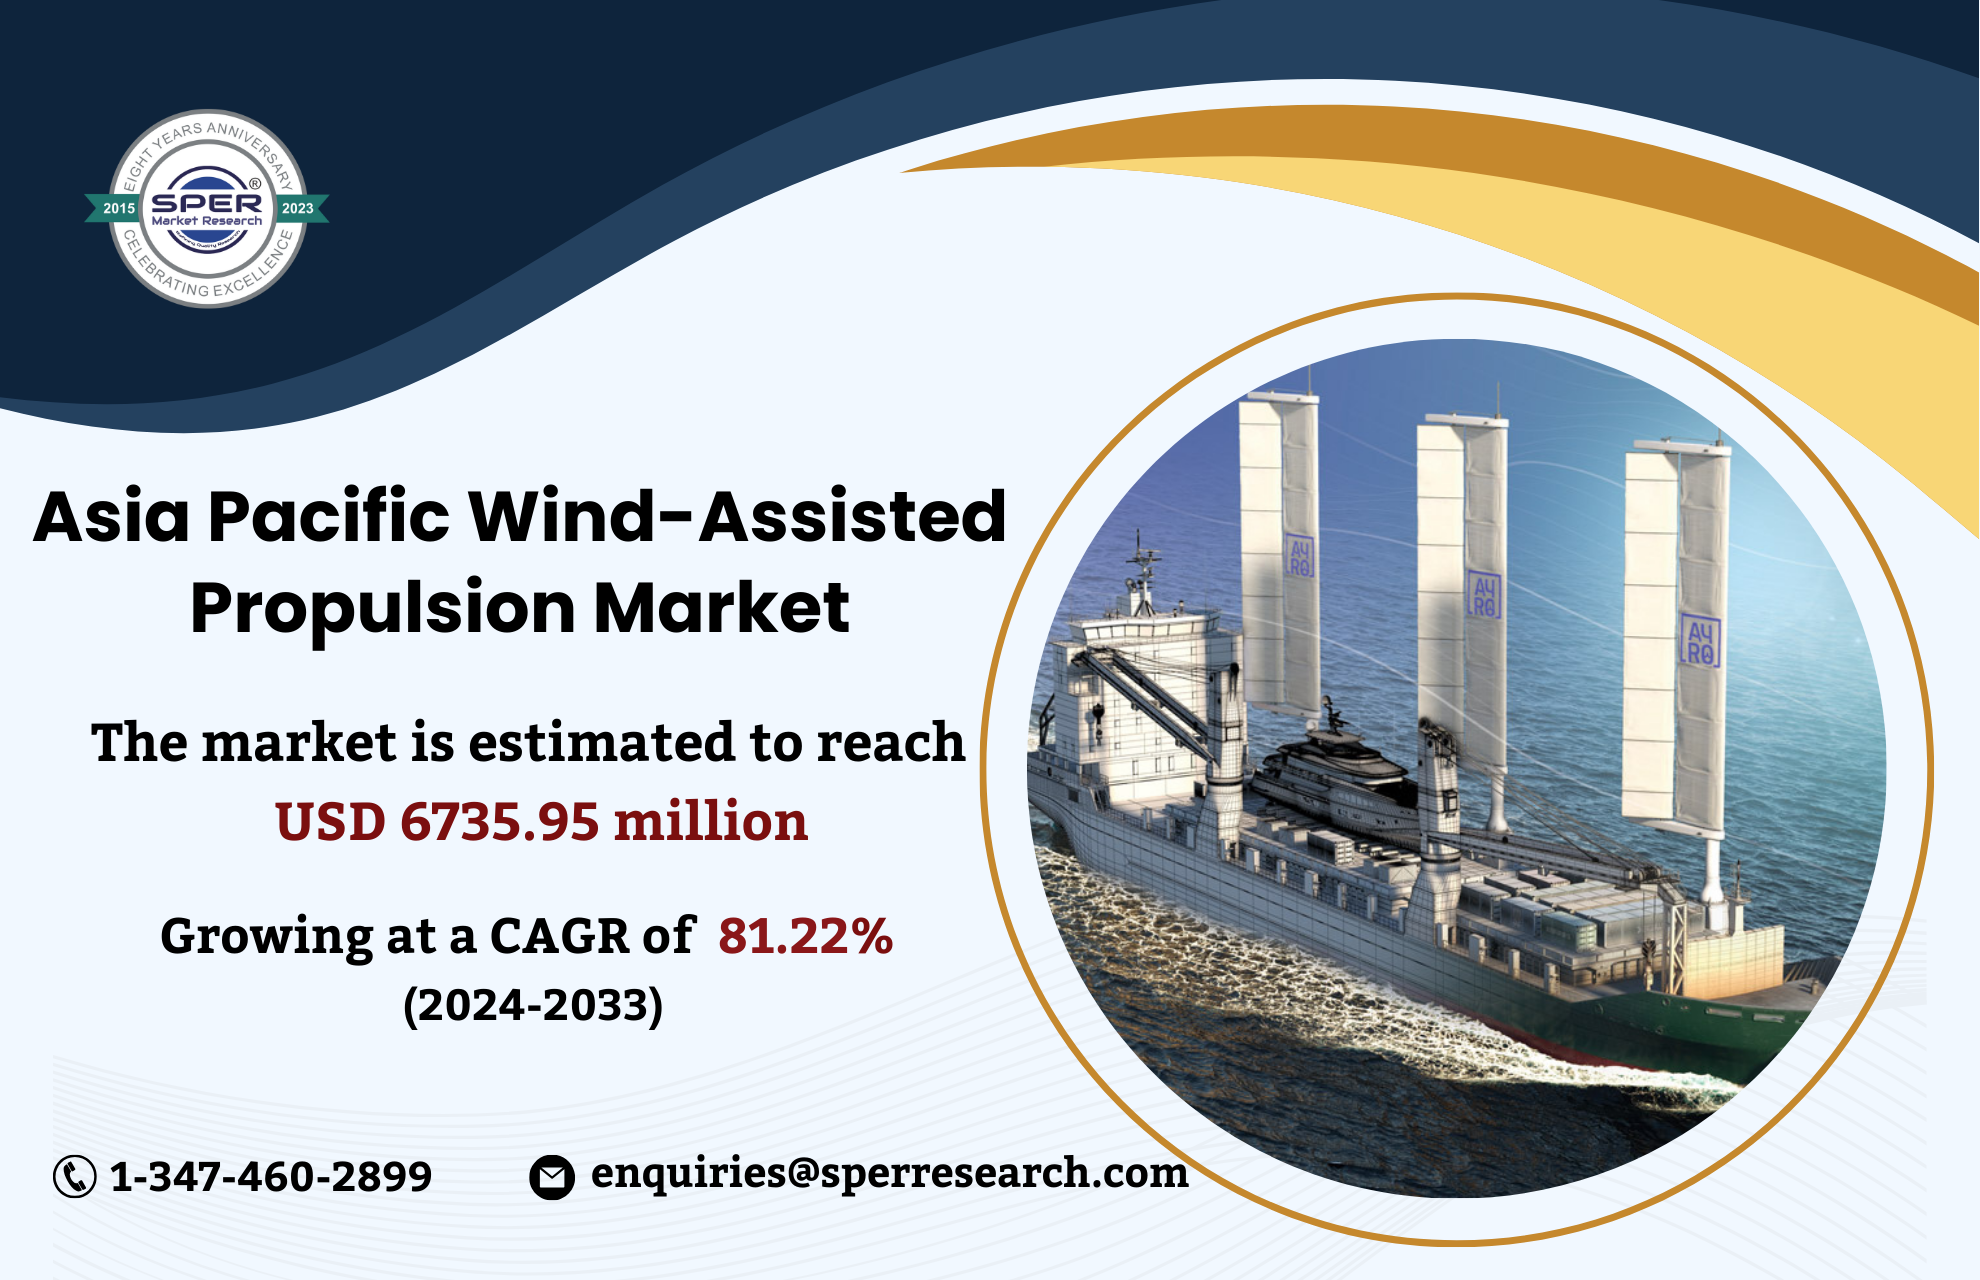 Asia Pacific Wind-Assisted Propulsion Market